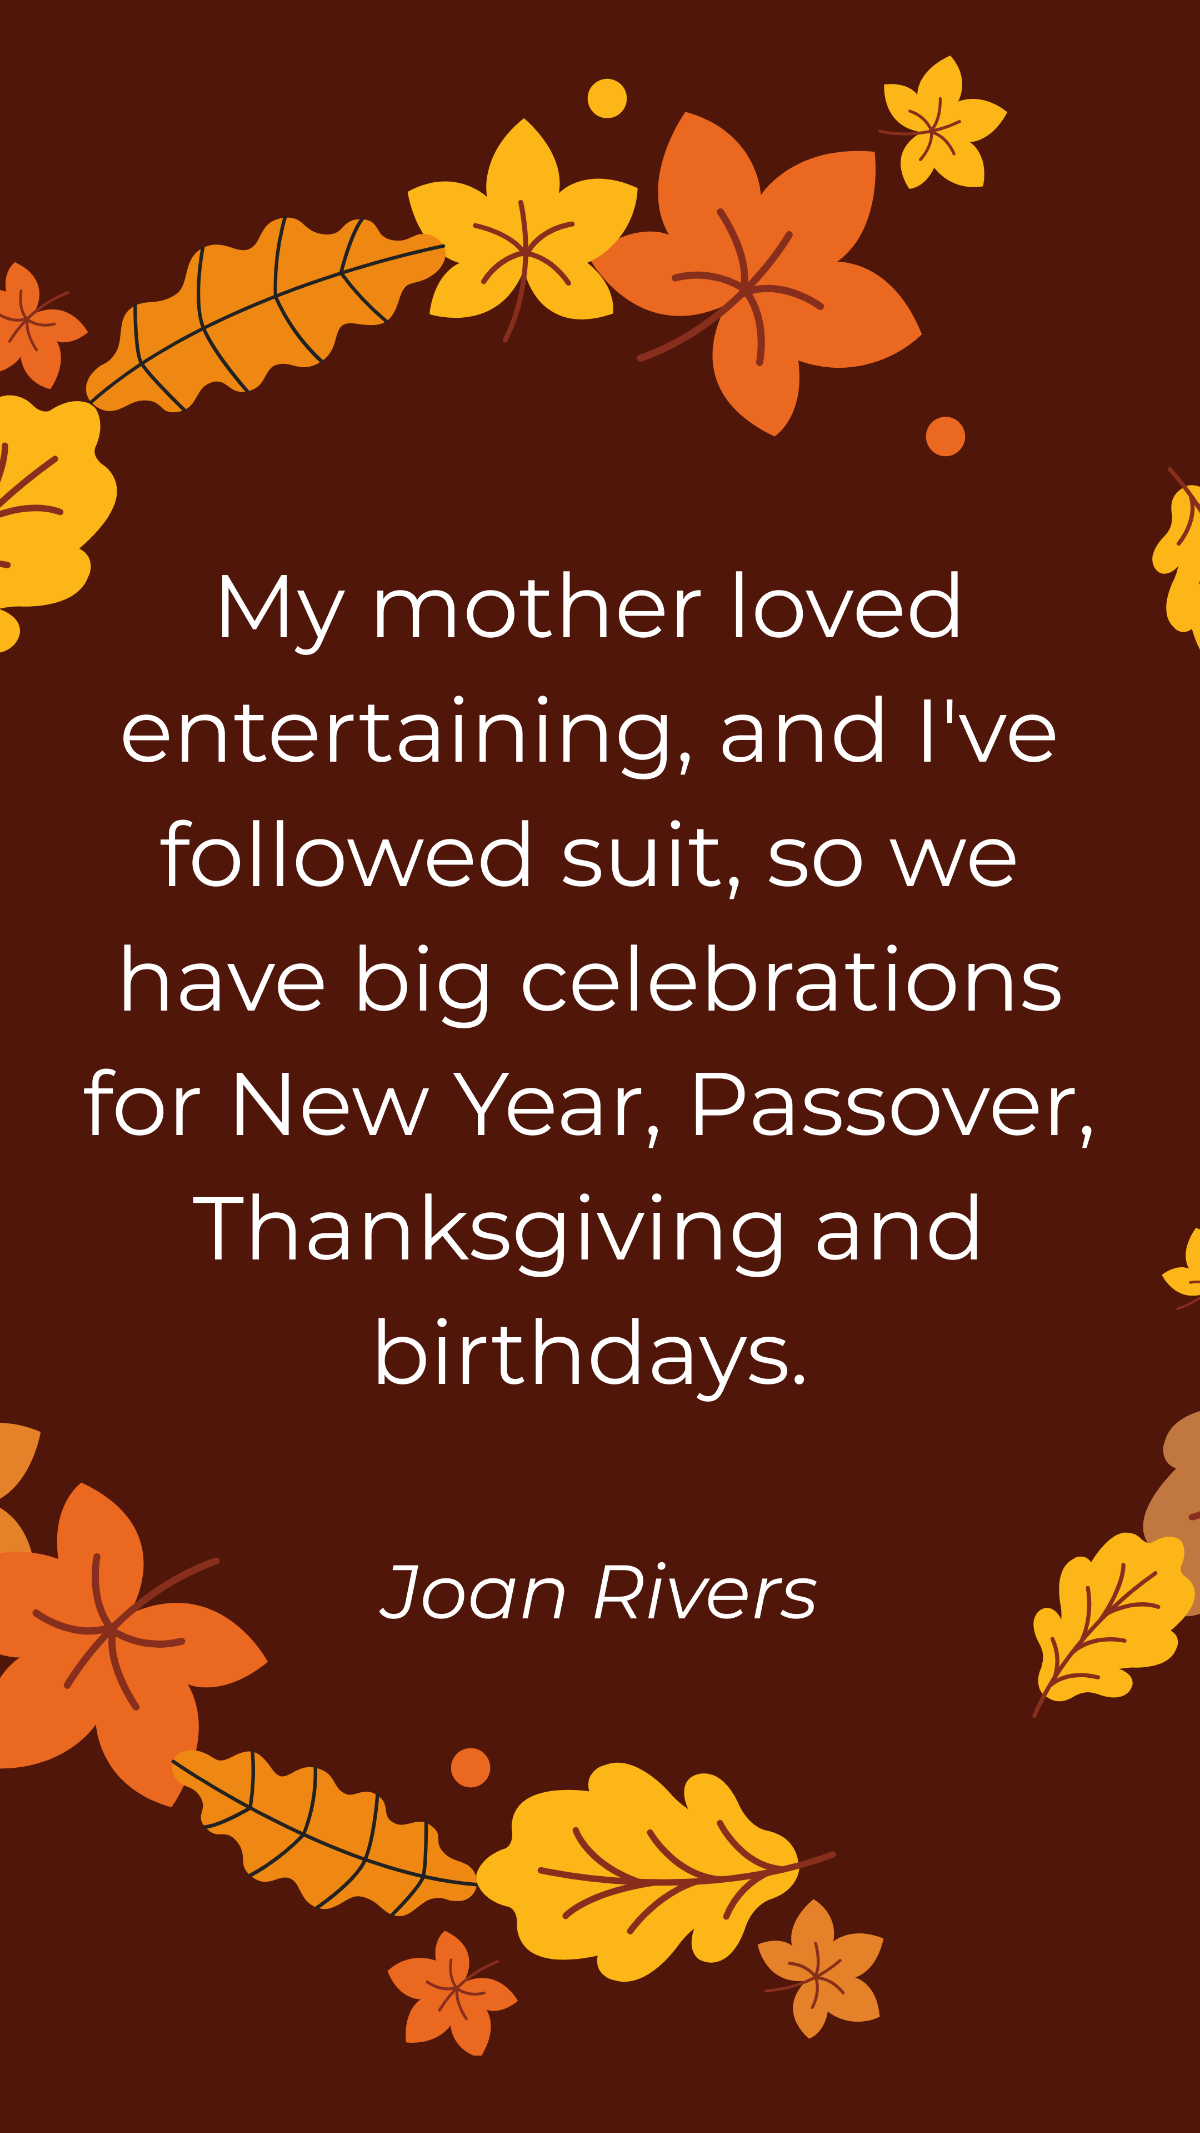 Joan Rivers - My mother loved entertaining, and I've followed suit, so we have big celebrations for New Year, Passover, Thanksgiving and birthdays. Template